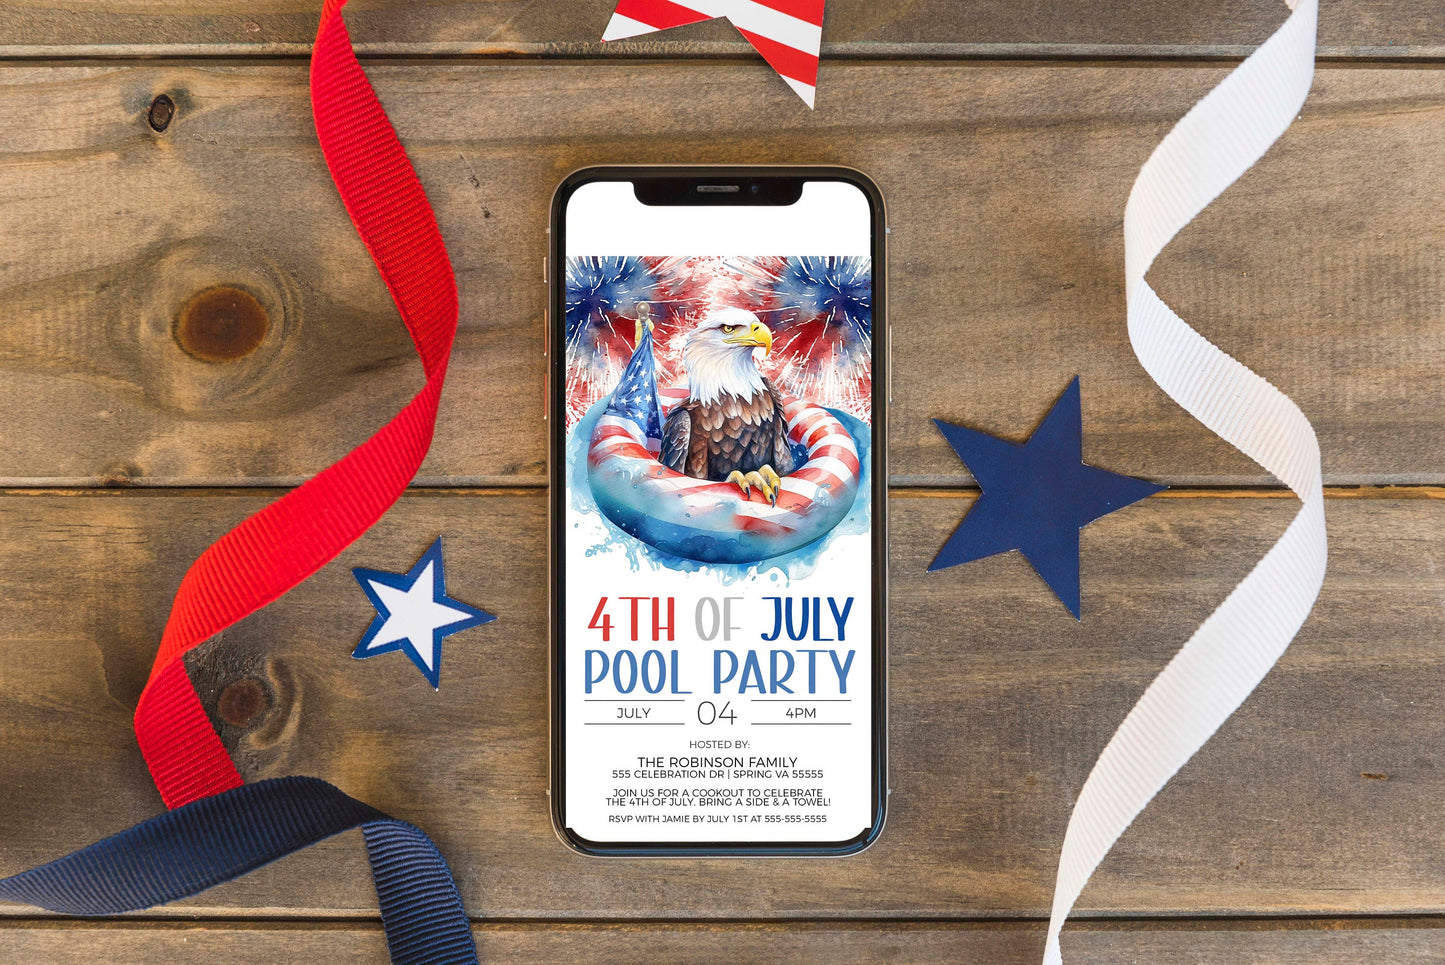 4th Of July Pool Party Invitation, Independence Day Pool Party Invite, July 4th BBQ Pool Party, American Bald Eagle, Editable Printable